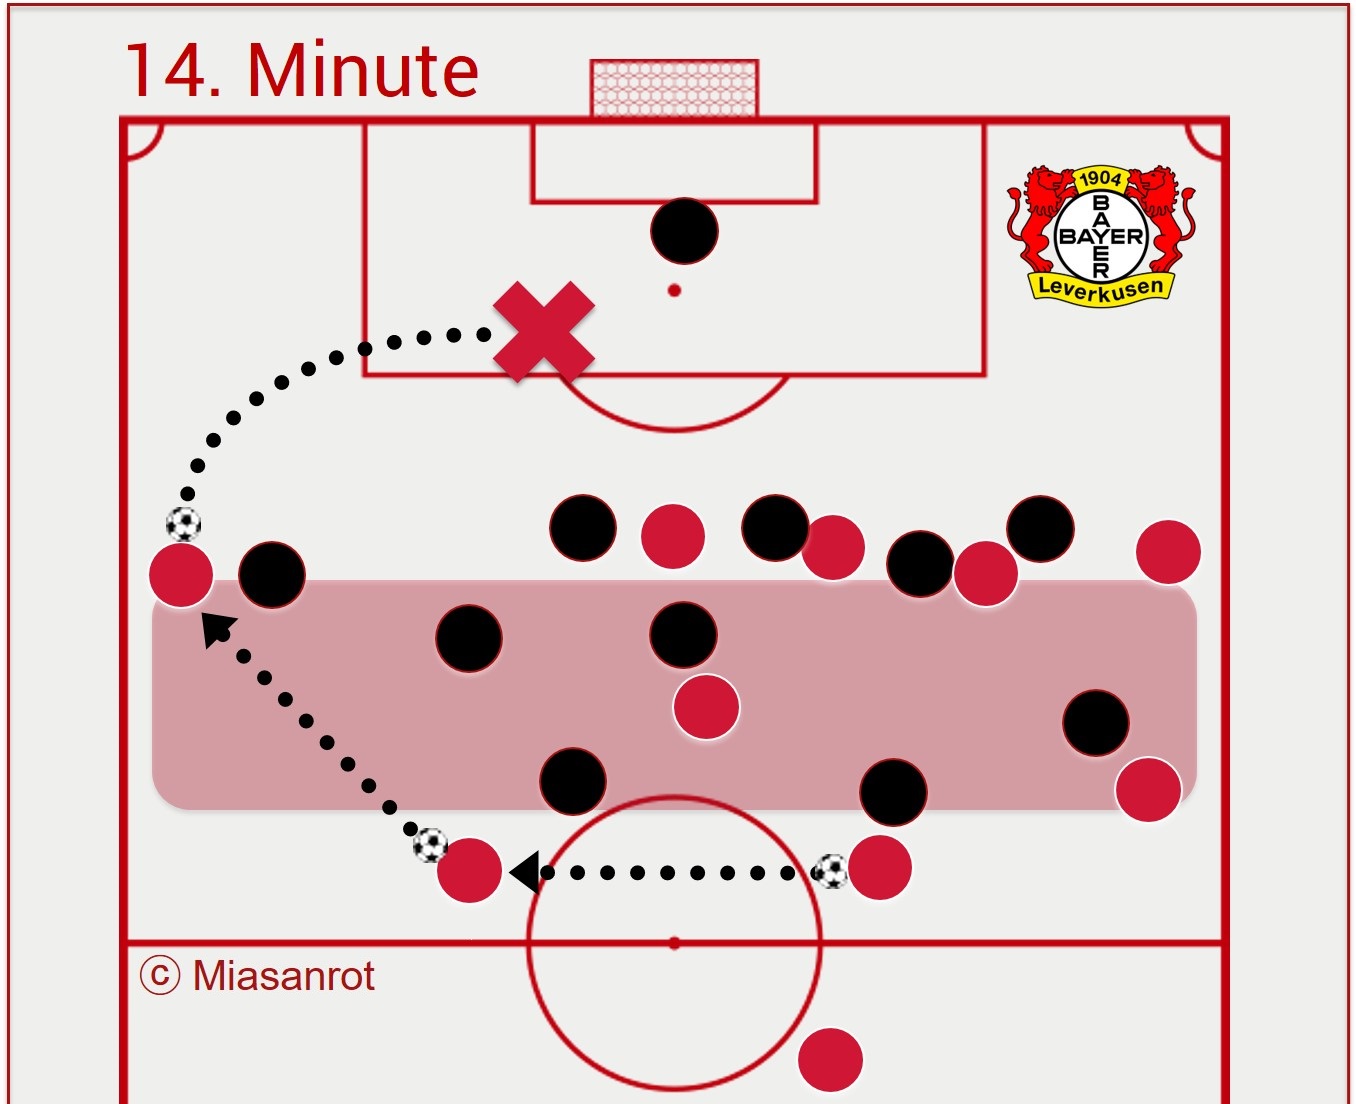 Picture from the first half against Leverkusen. The half spaces are covered poorly. The approach over the wings is the only option available with no further support happening. As a result the ball is crossed, which results into a loss of possession.